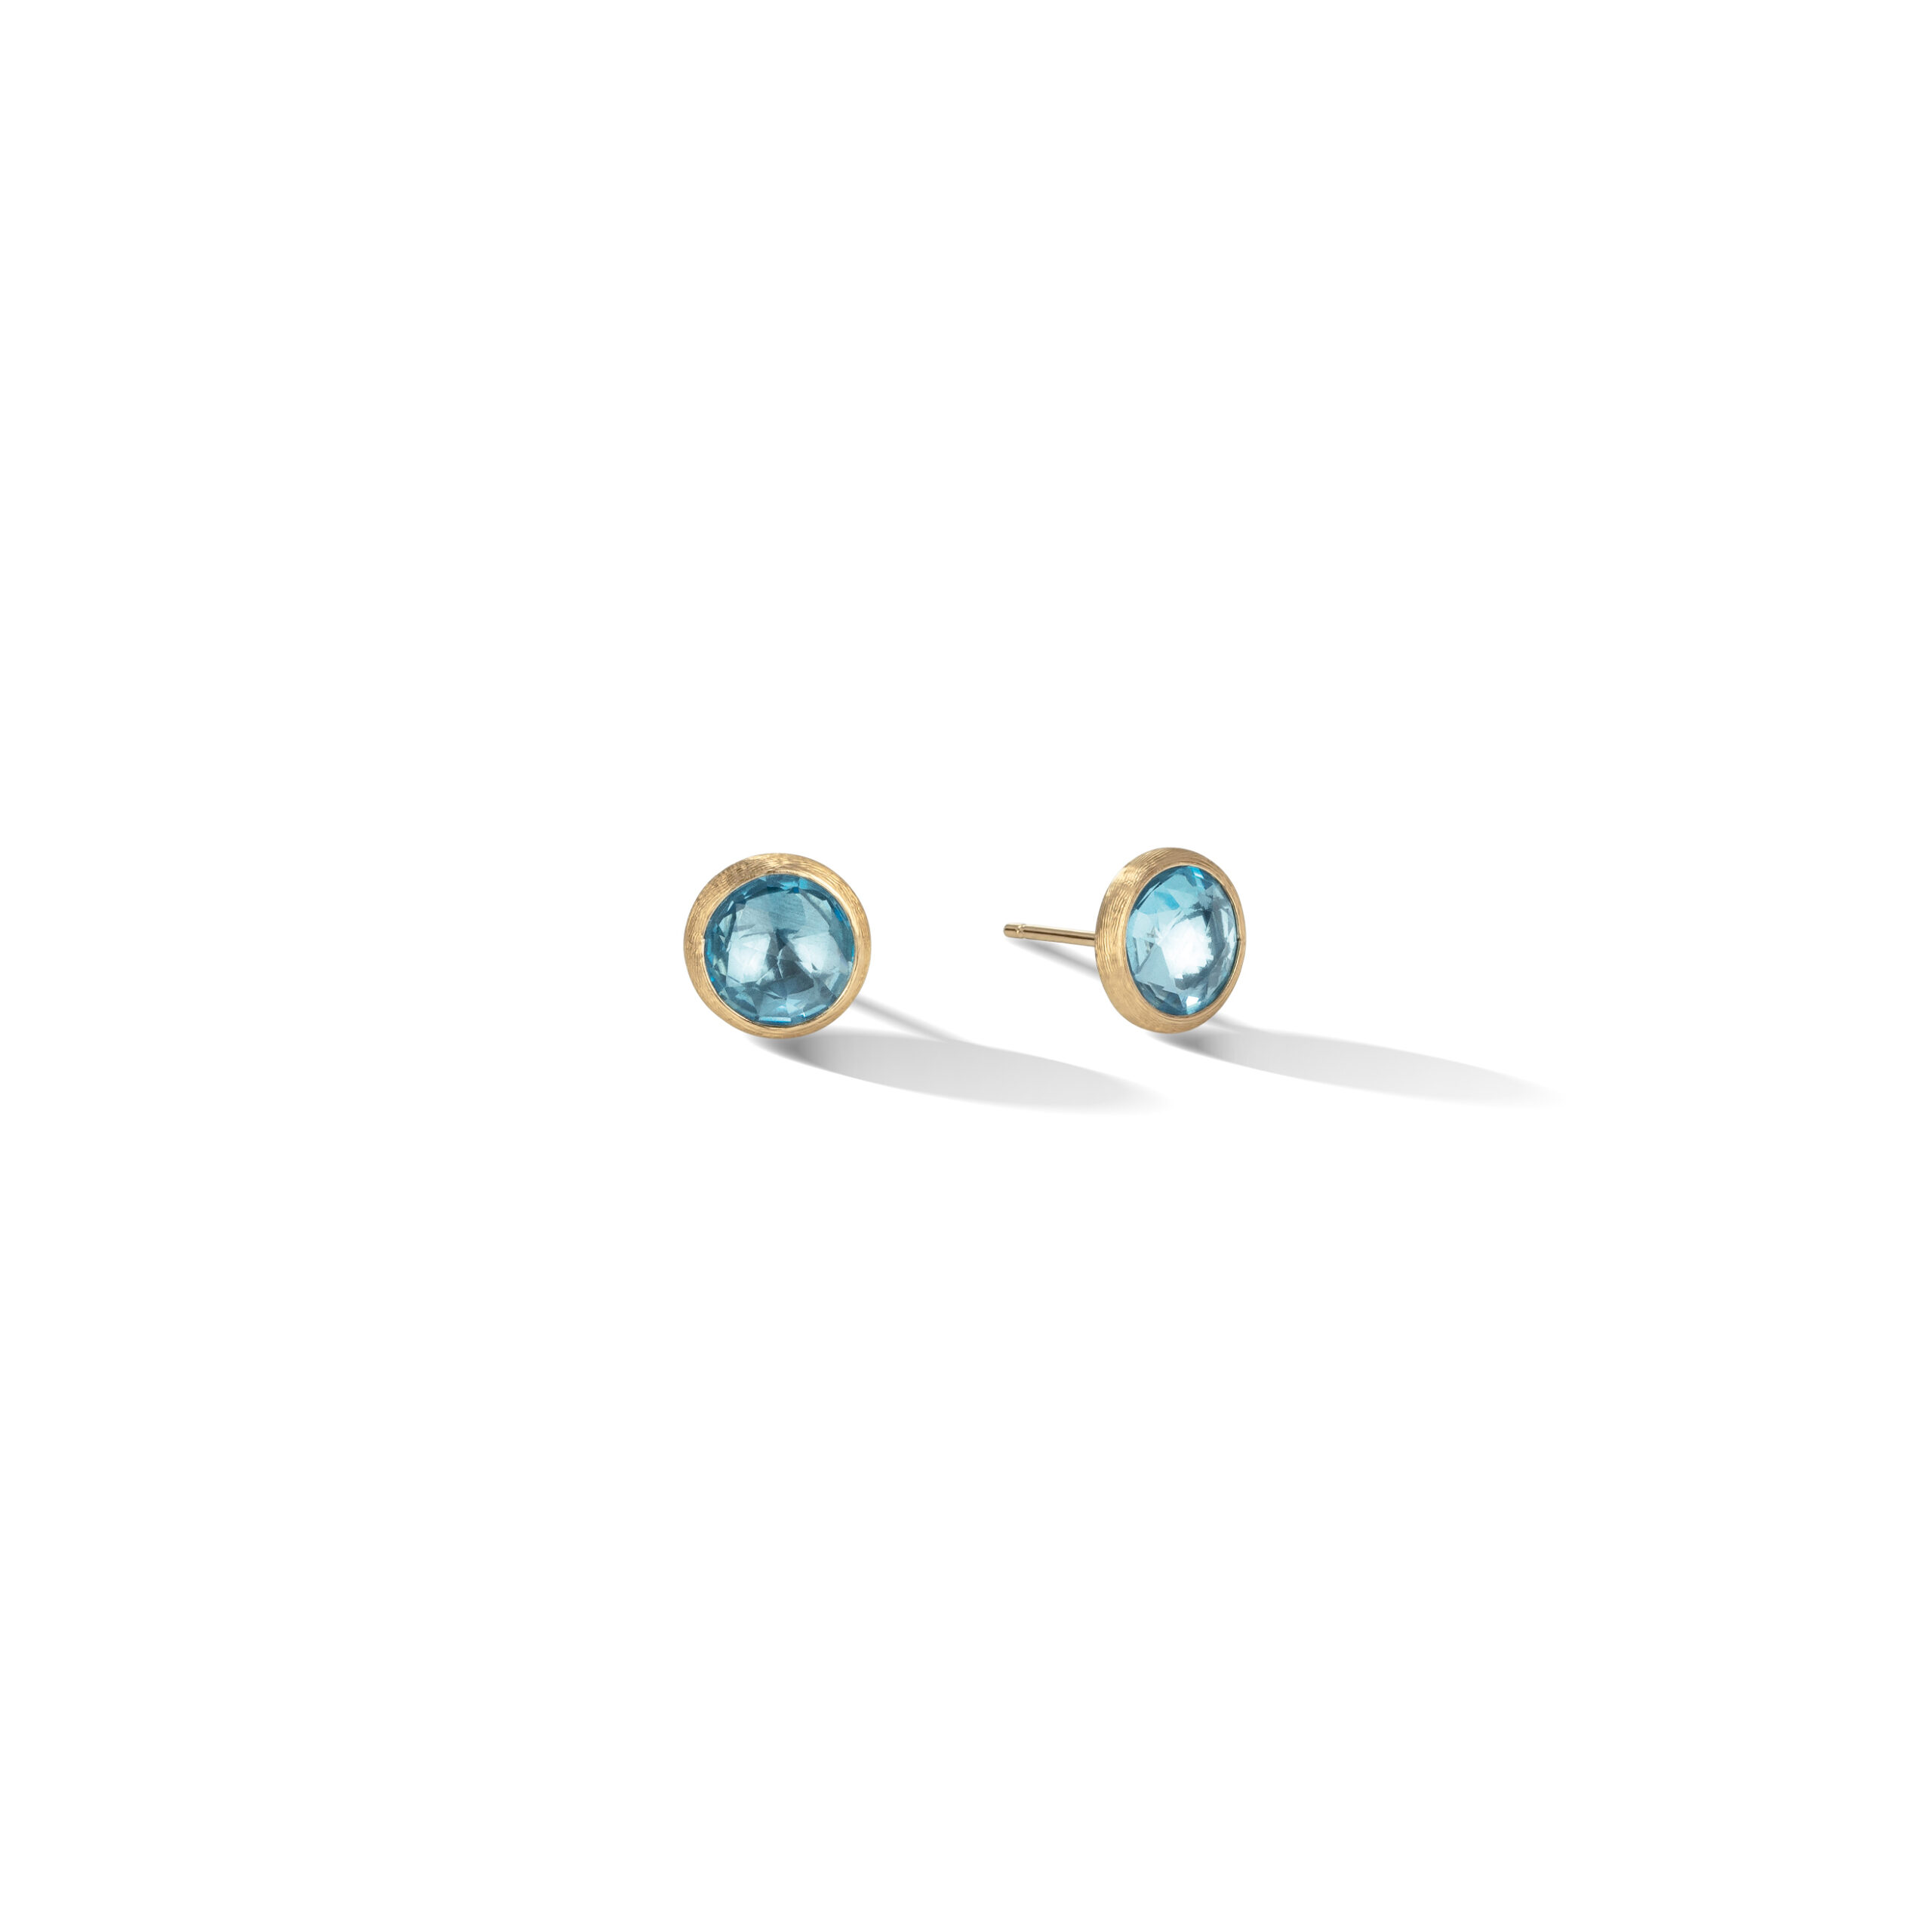 OB957 TP01 Y 02Marco Bicego Jaipur Color Collection 18k Yellow Gold Blue Topaz Stud Earrings